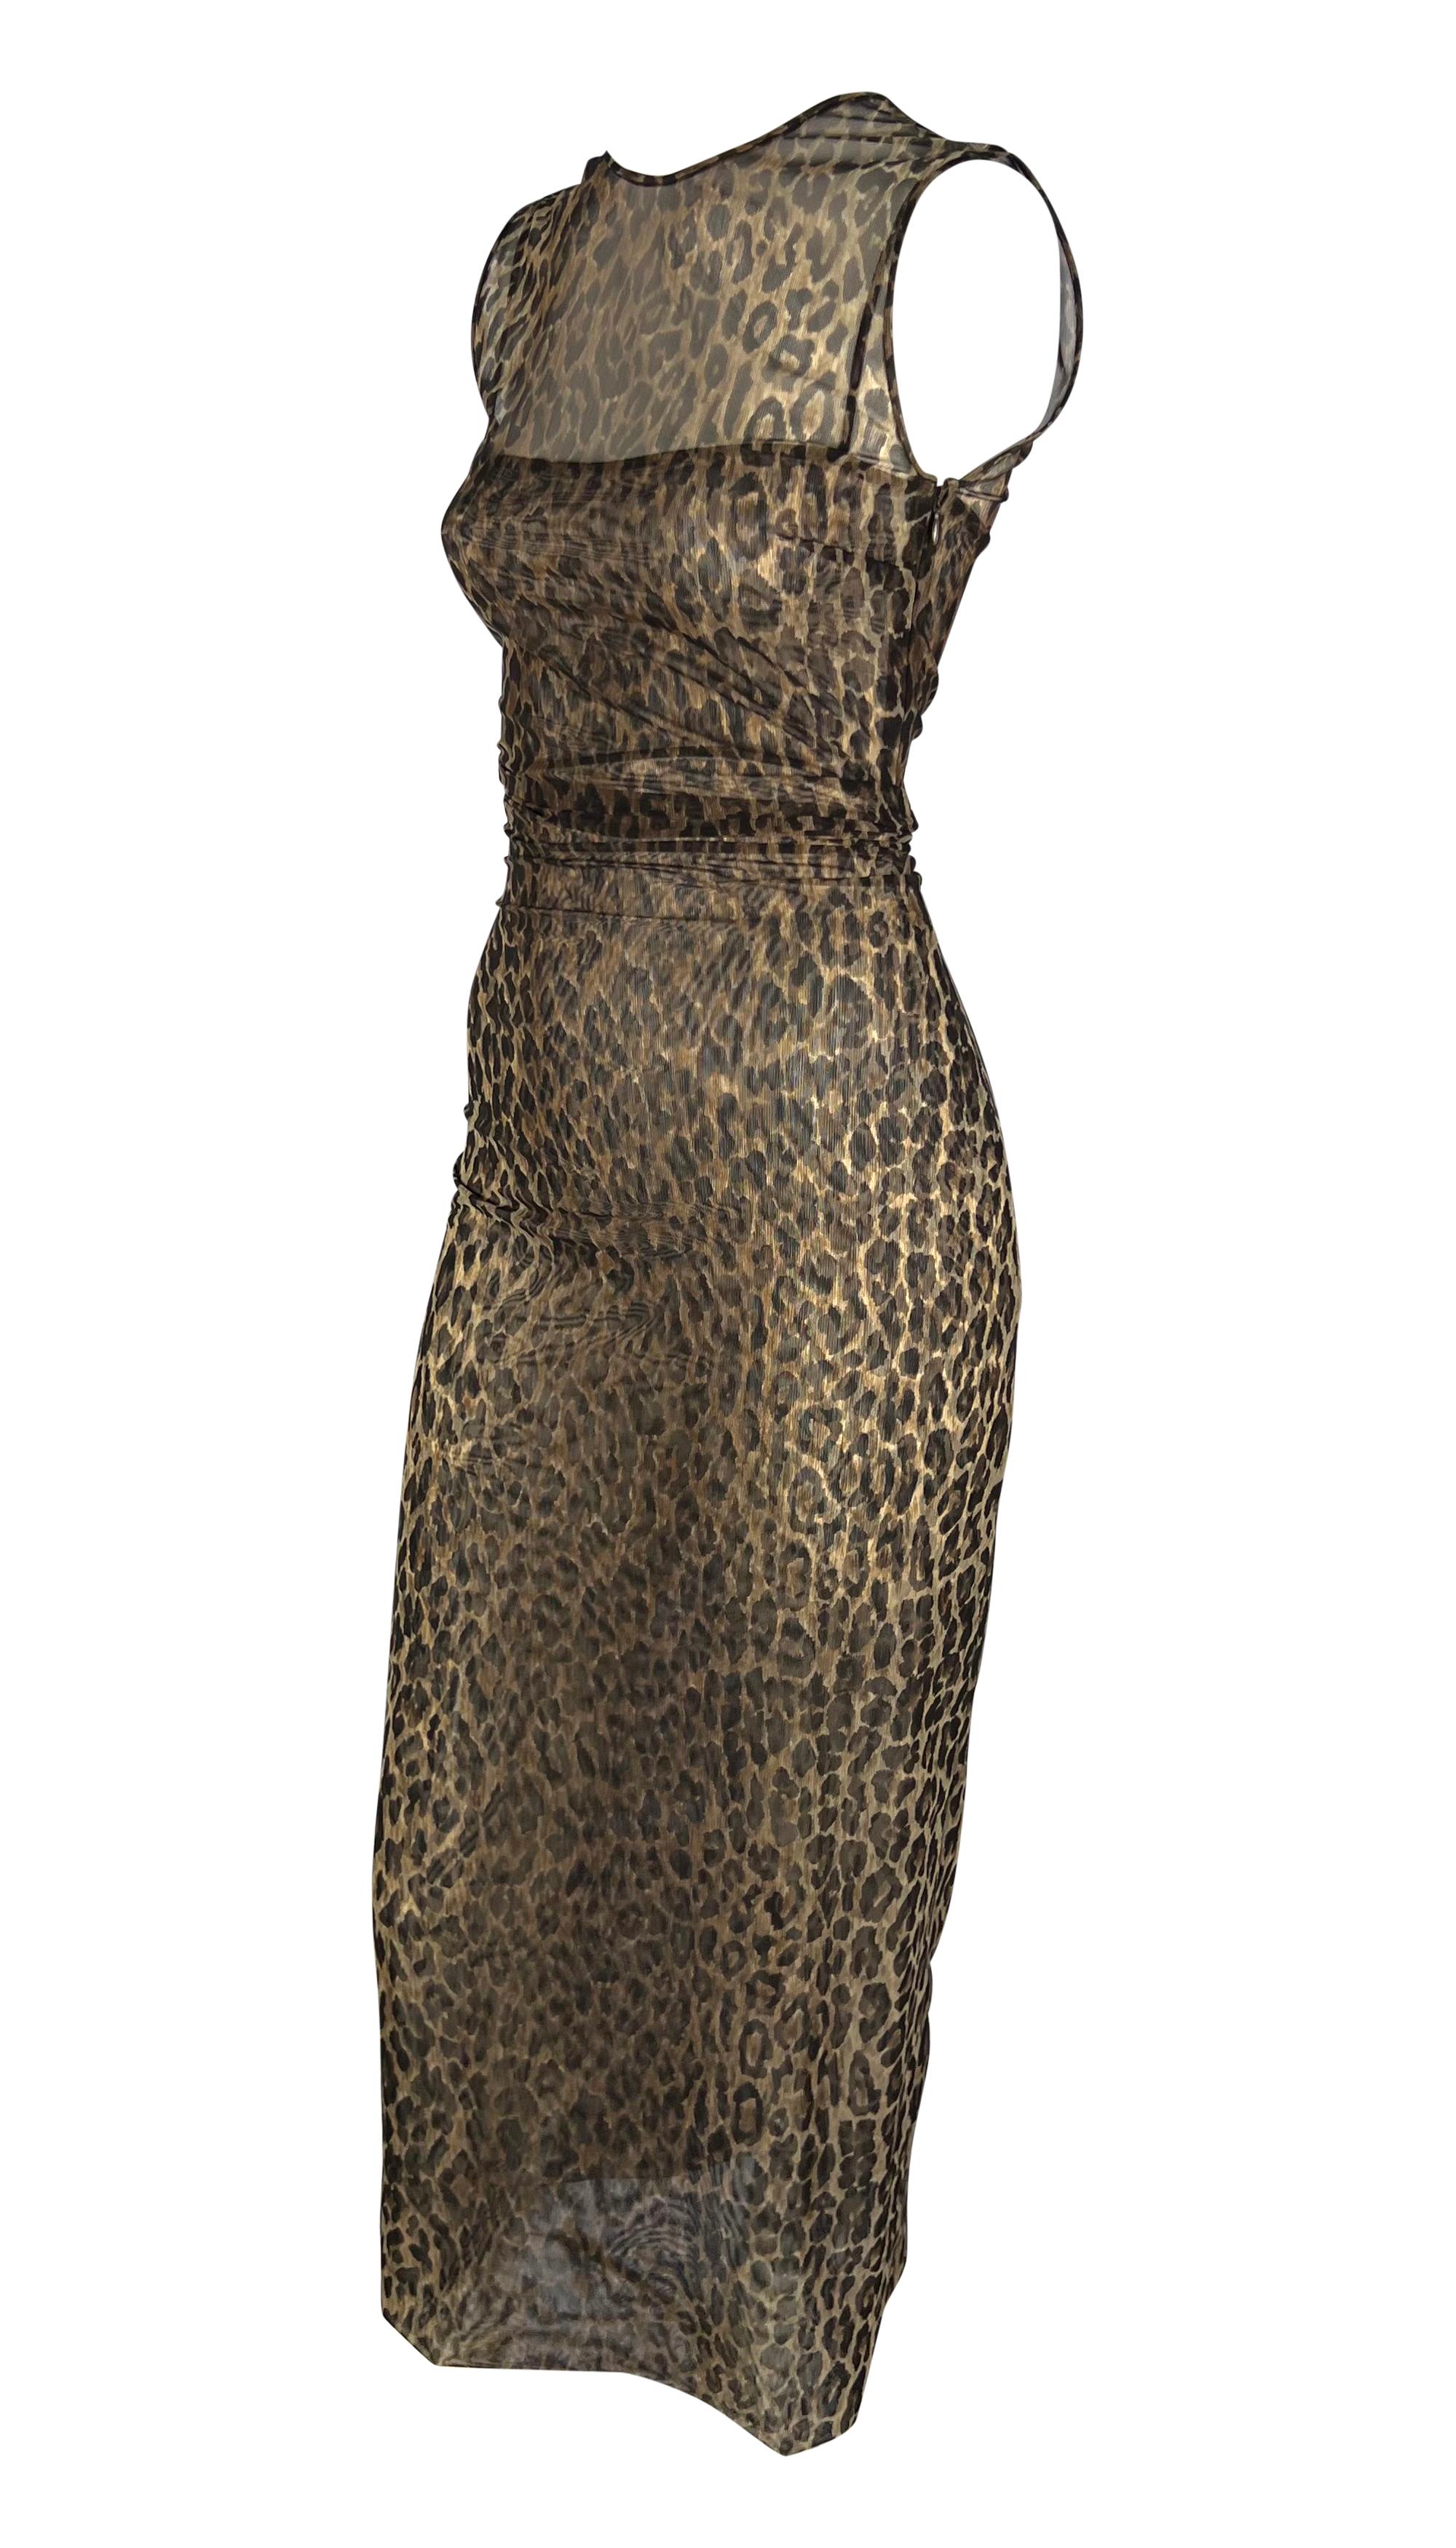 Late 1990s Dolce & Gabbana Sheer Sleeveless Cheetah Print Ruched Bodycon Dress In Excellent Condition For Sale In West Hollywood, CA